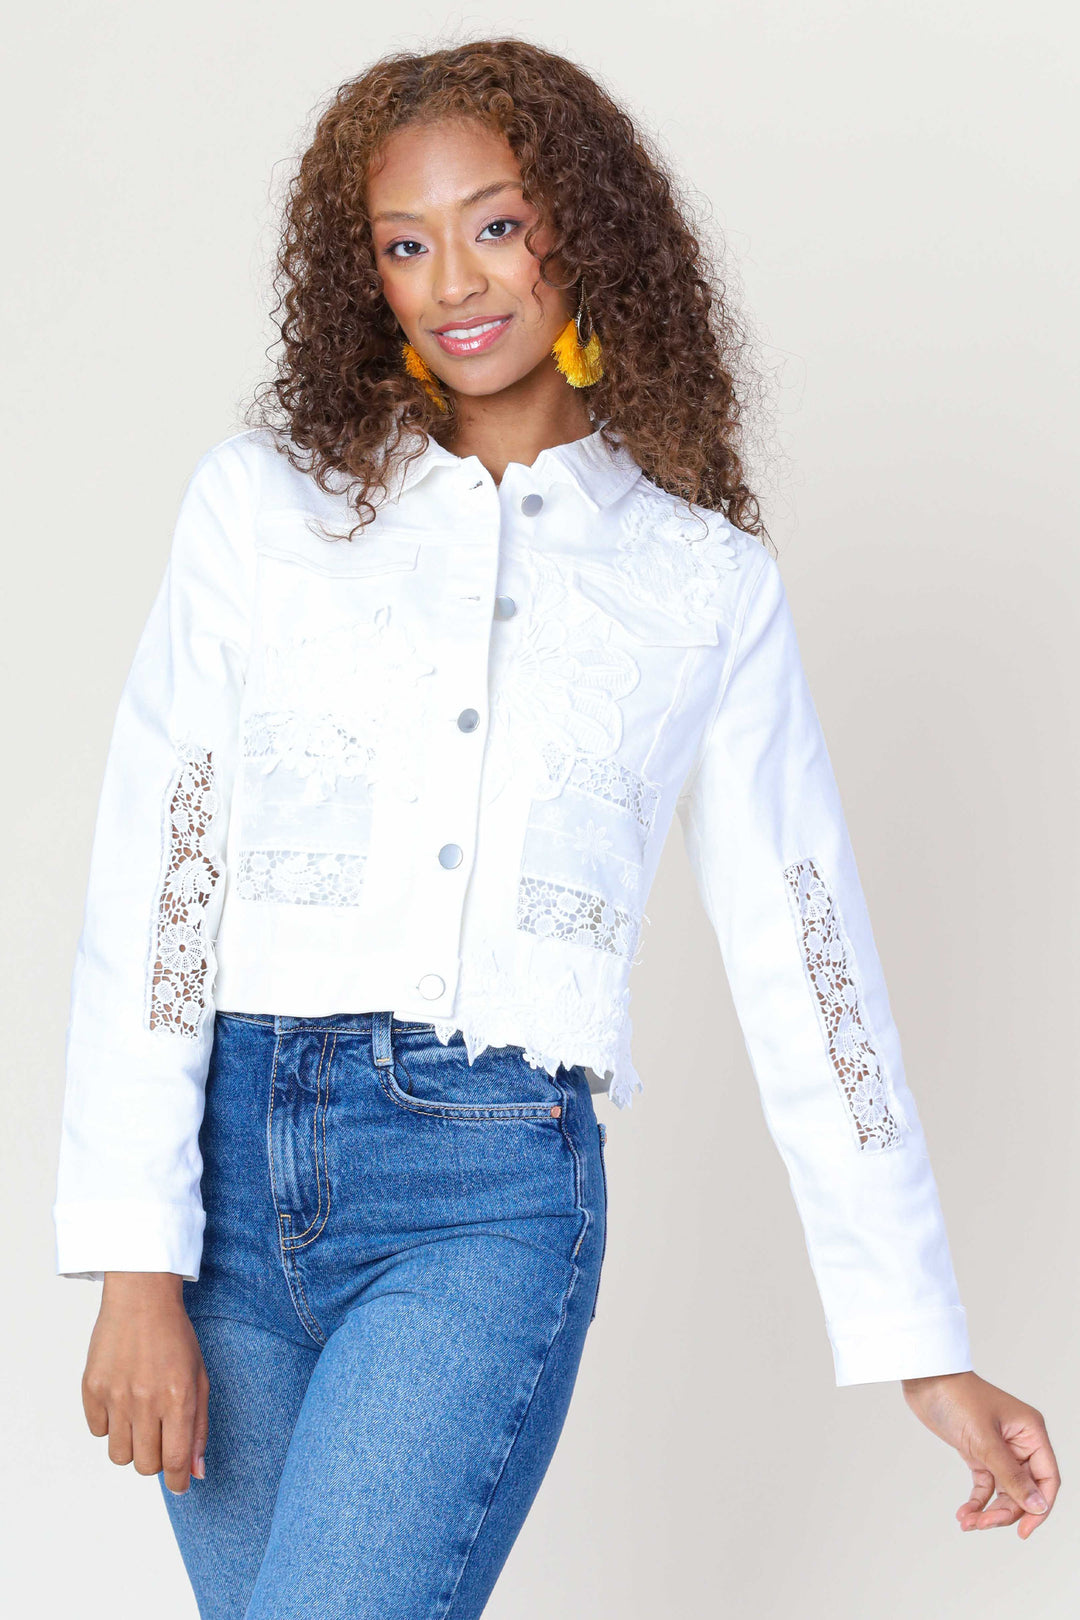 Fashion Concepts Summer 2024 This Jean Jacket With Lace features a beautiful floral doily design throughout, adding a unique touch to the classic collar and full front button design.